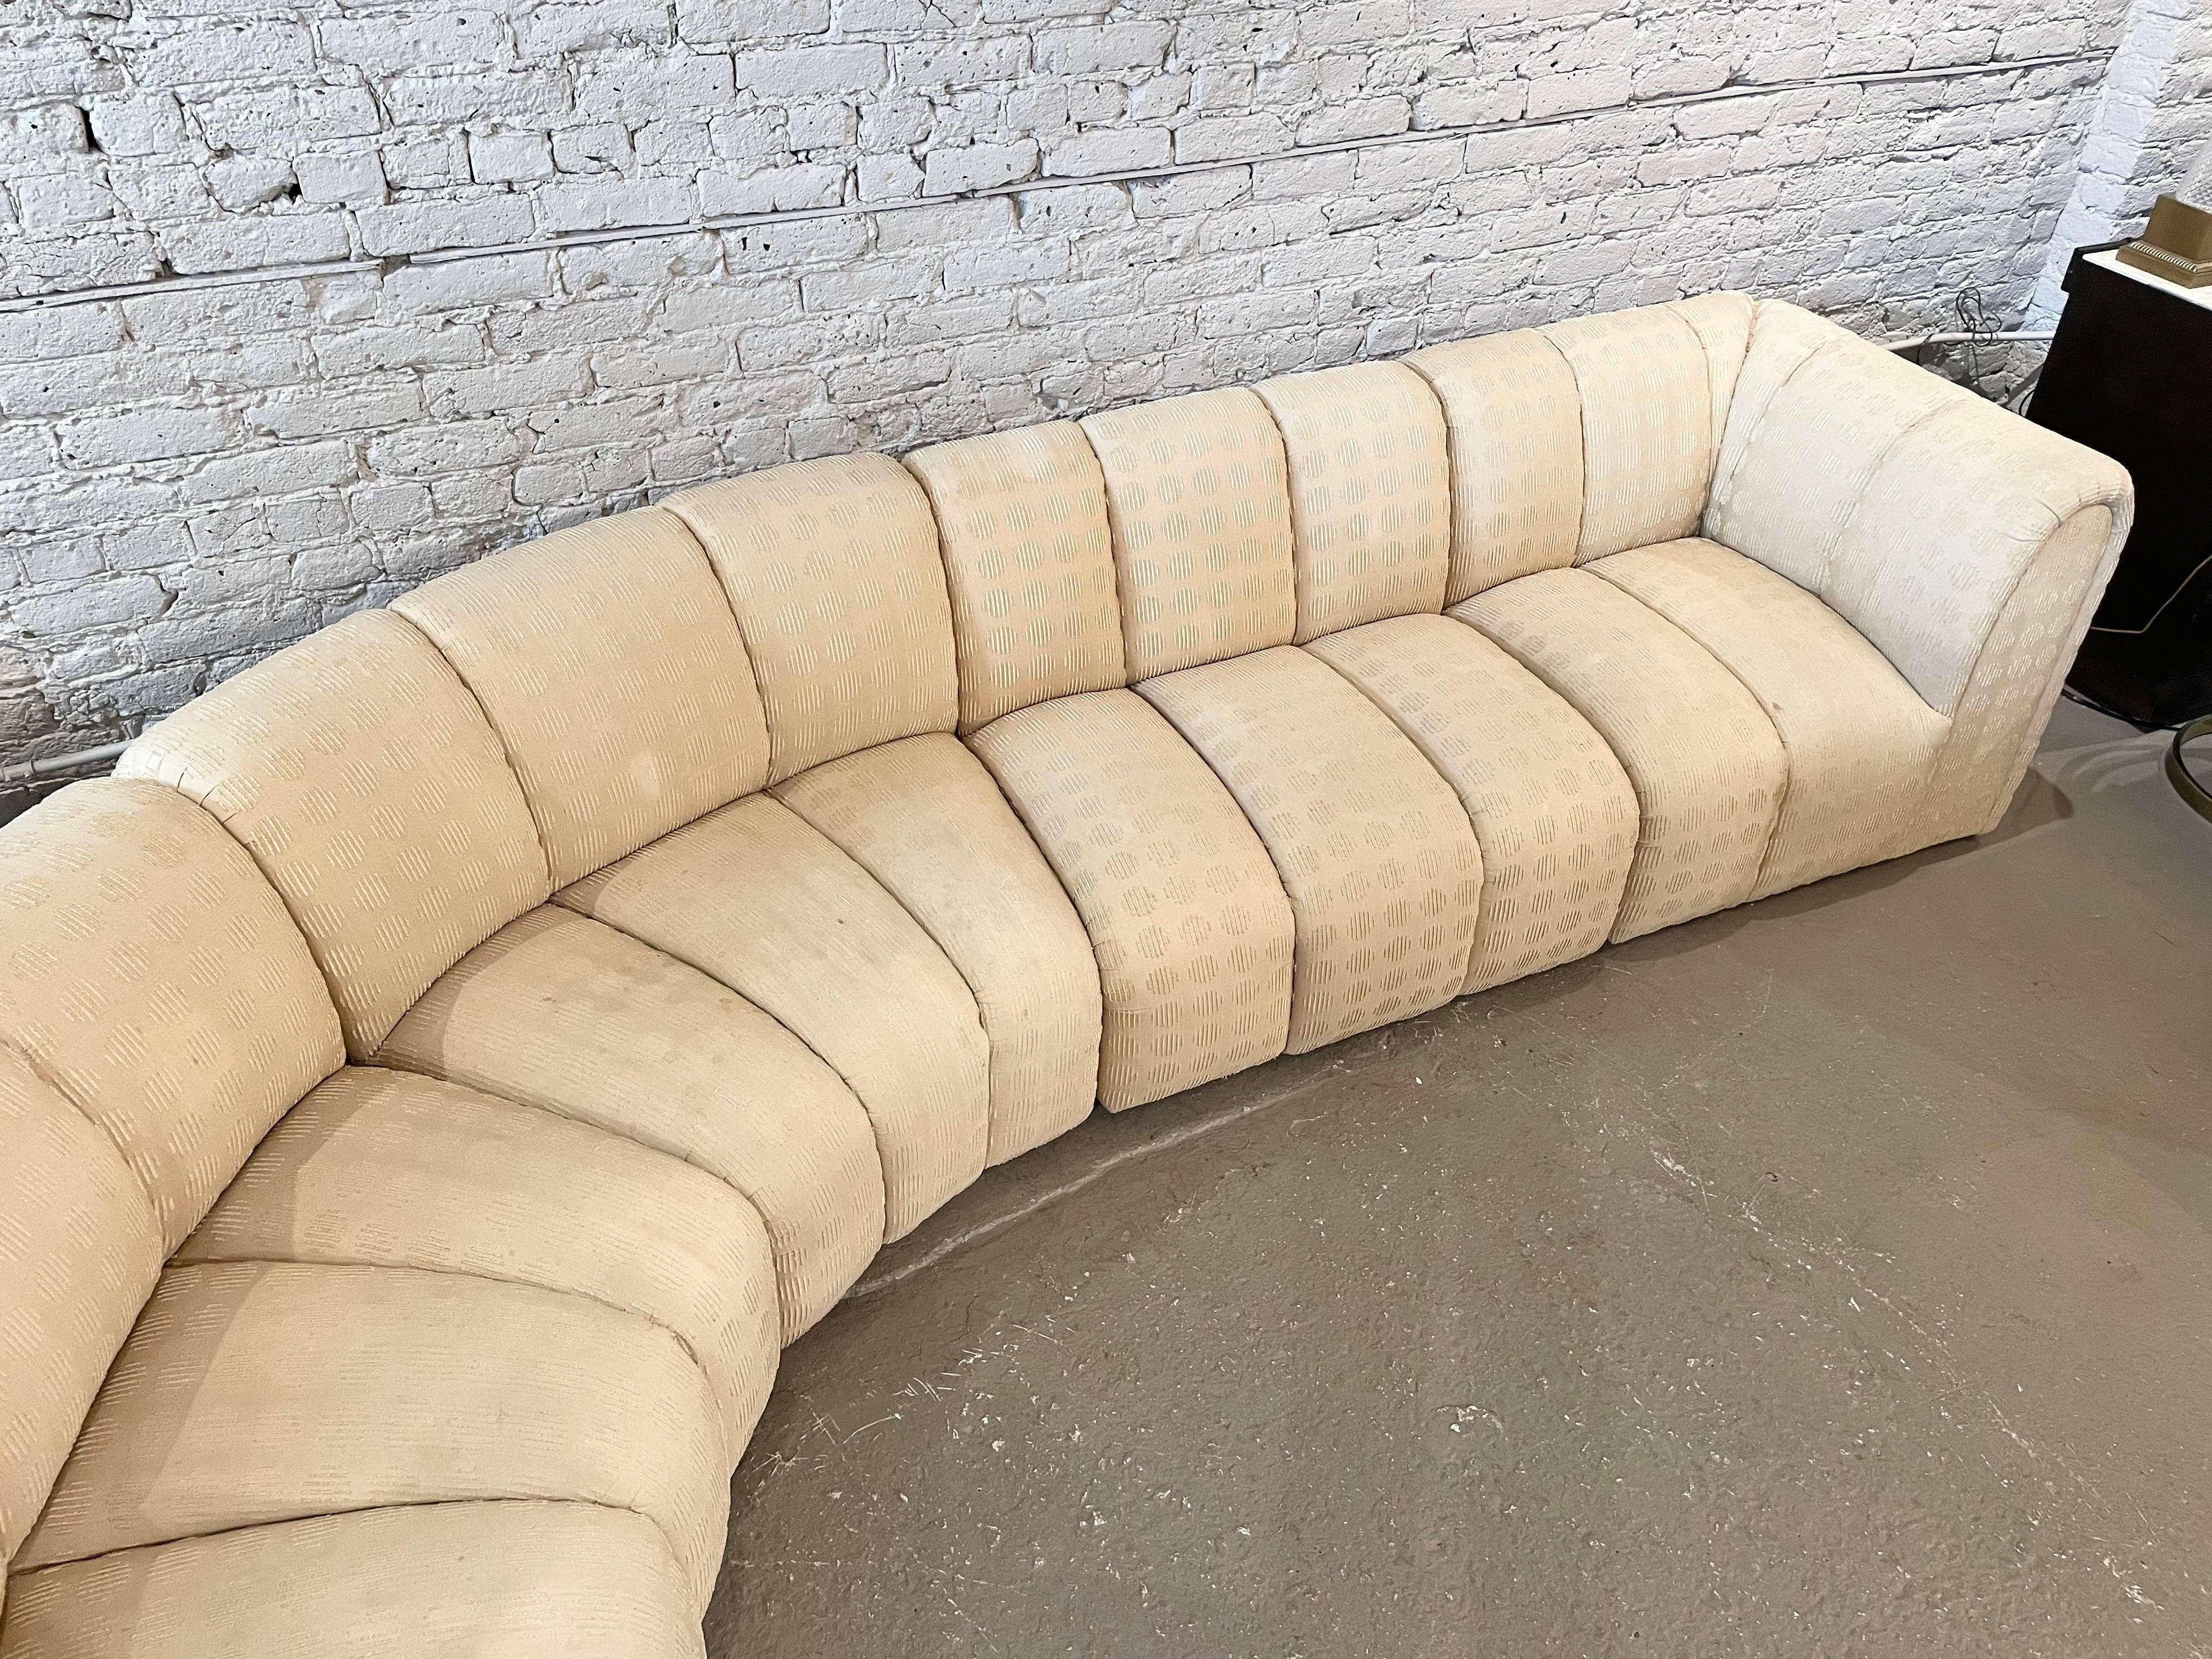 Stunning channeled sofa that is so comfy. You really just fall into this. It comes in 4 pieces. Upholstery suggested. But the cushions and foam are great!